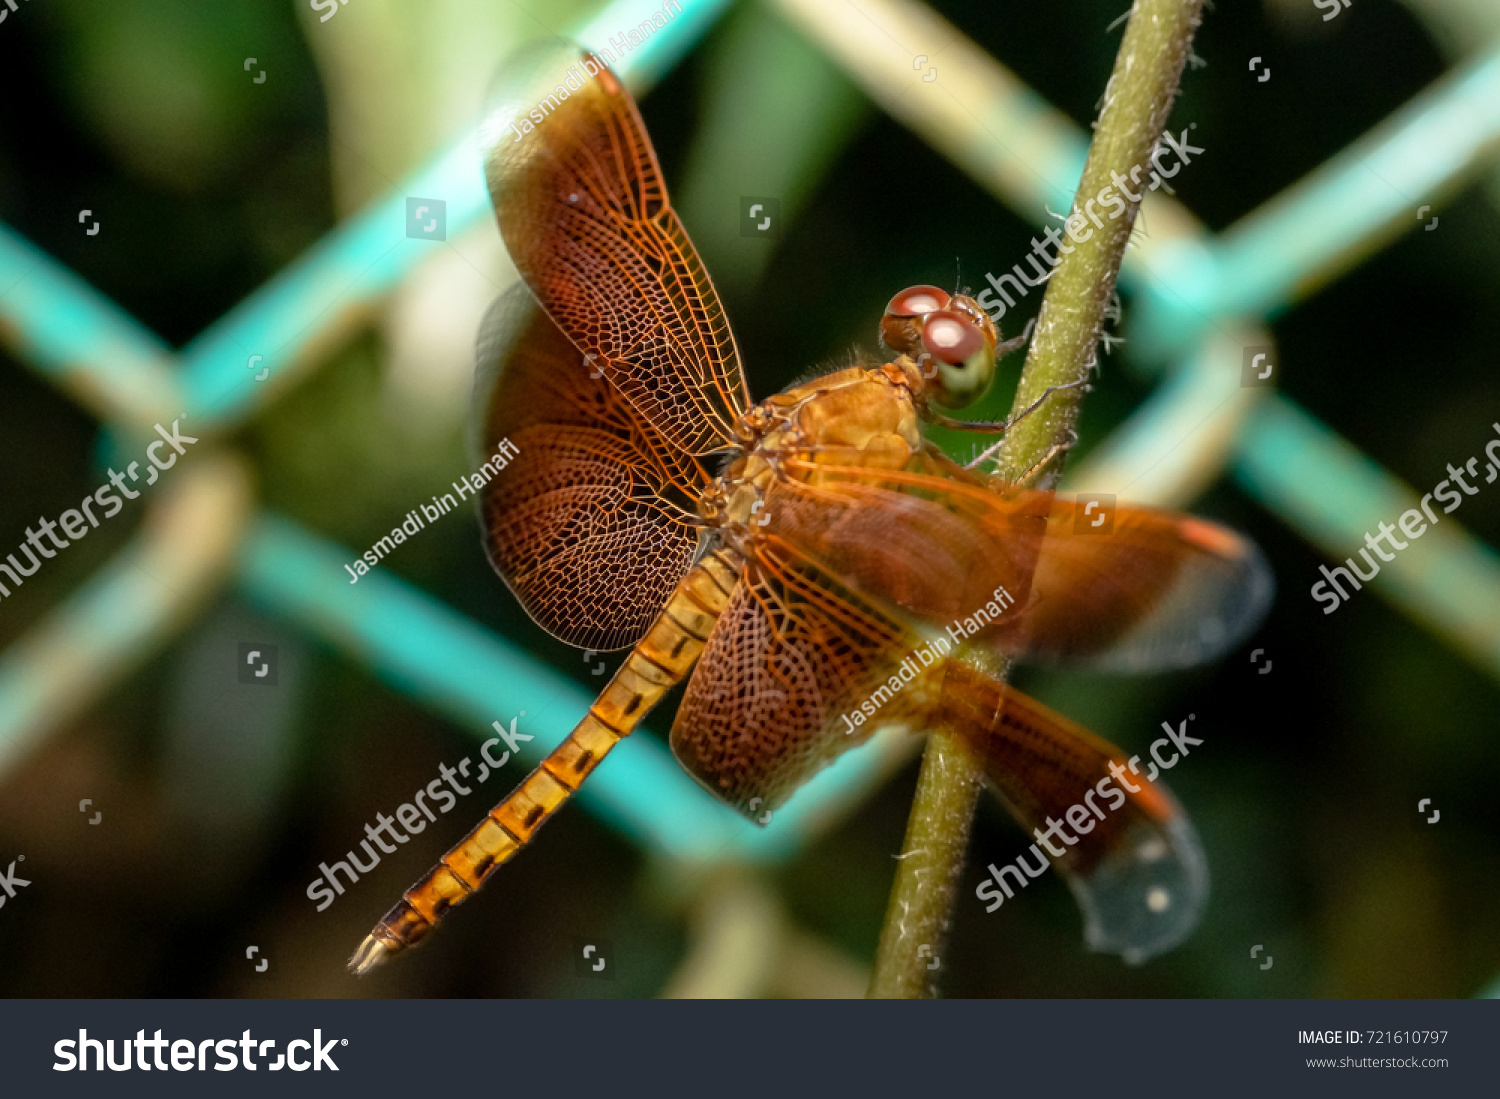 Dragonfly in malay